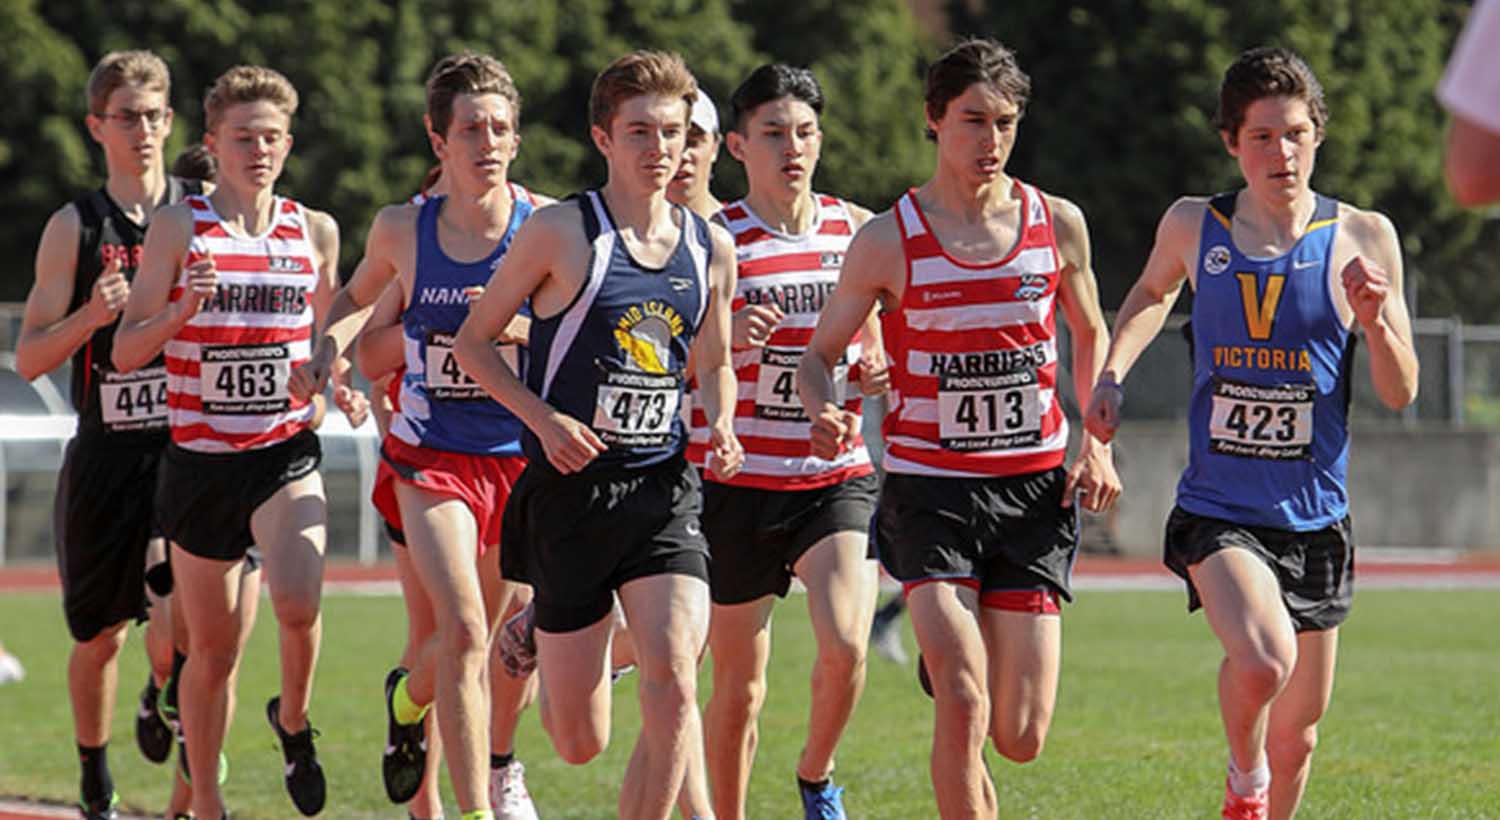 Harriers Youth men's team running a race